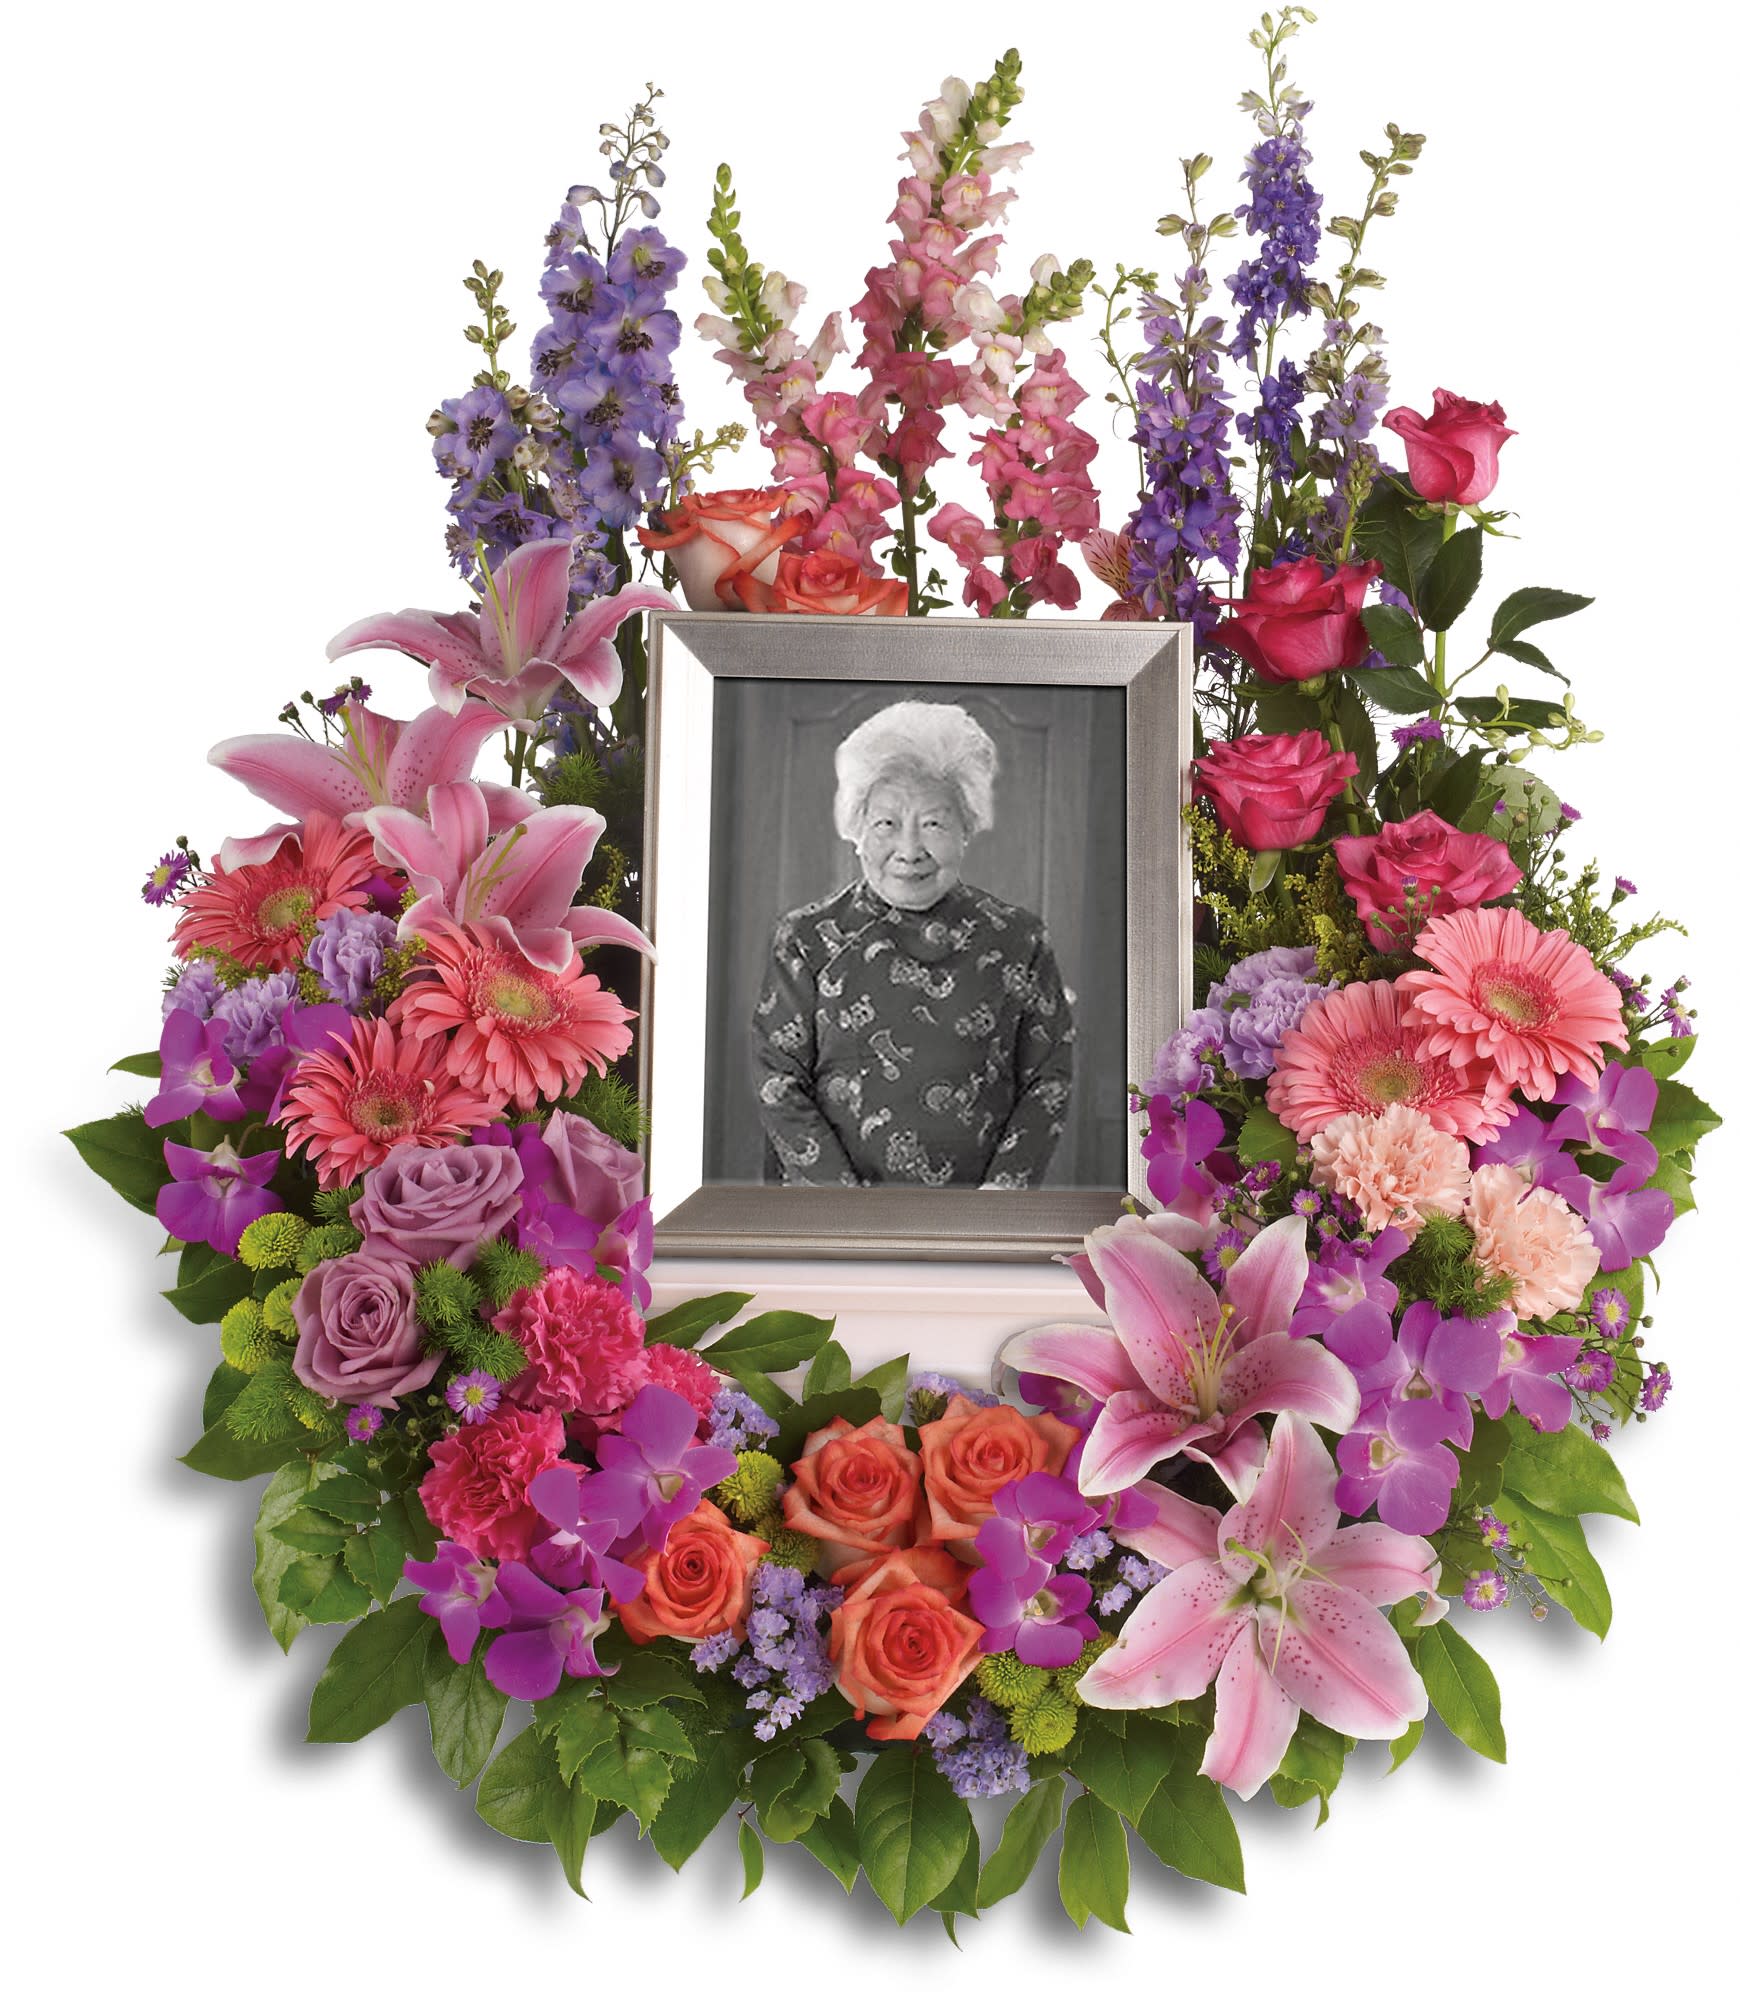 In Memoriam Wreath - Devotion is expressed and beautiful memories cherished with this deep-hued and softly elegant wreath. A lovely reminder of your affection and respect.